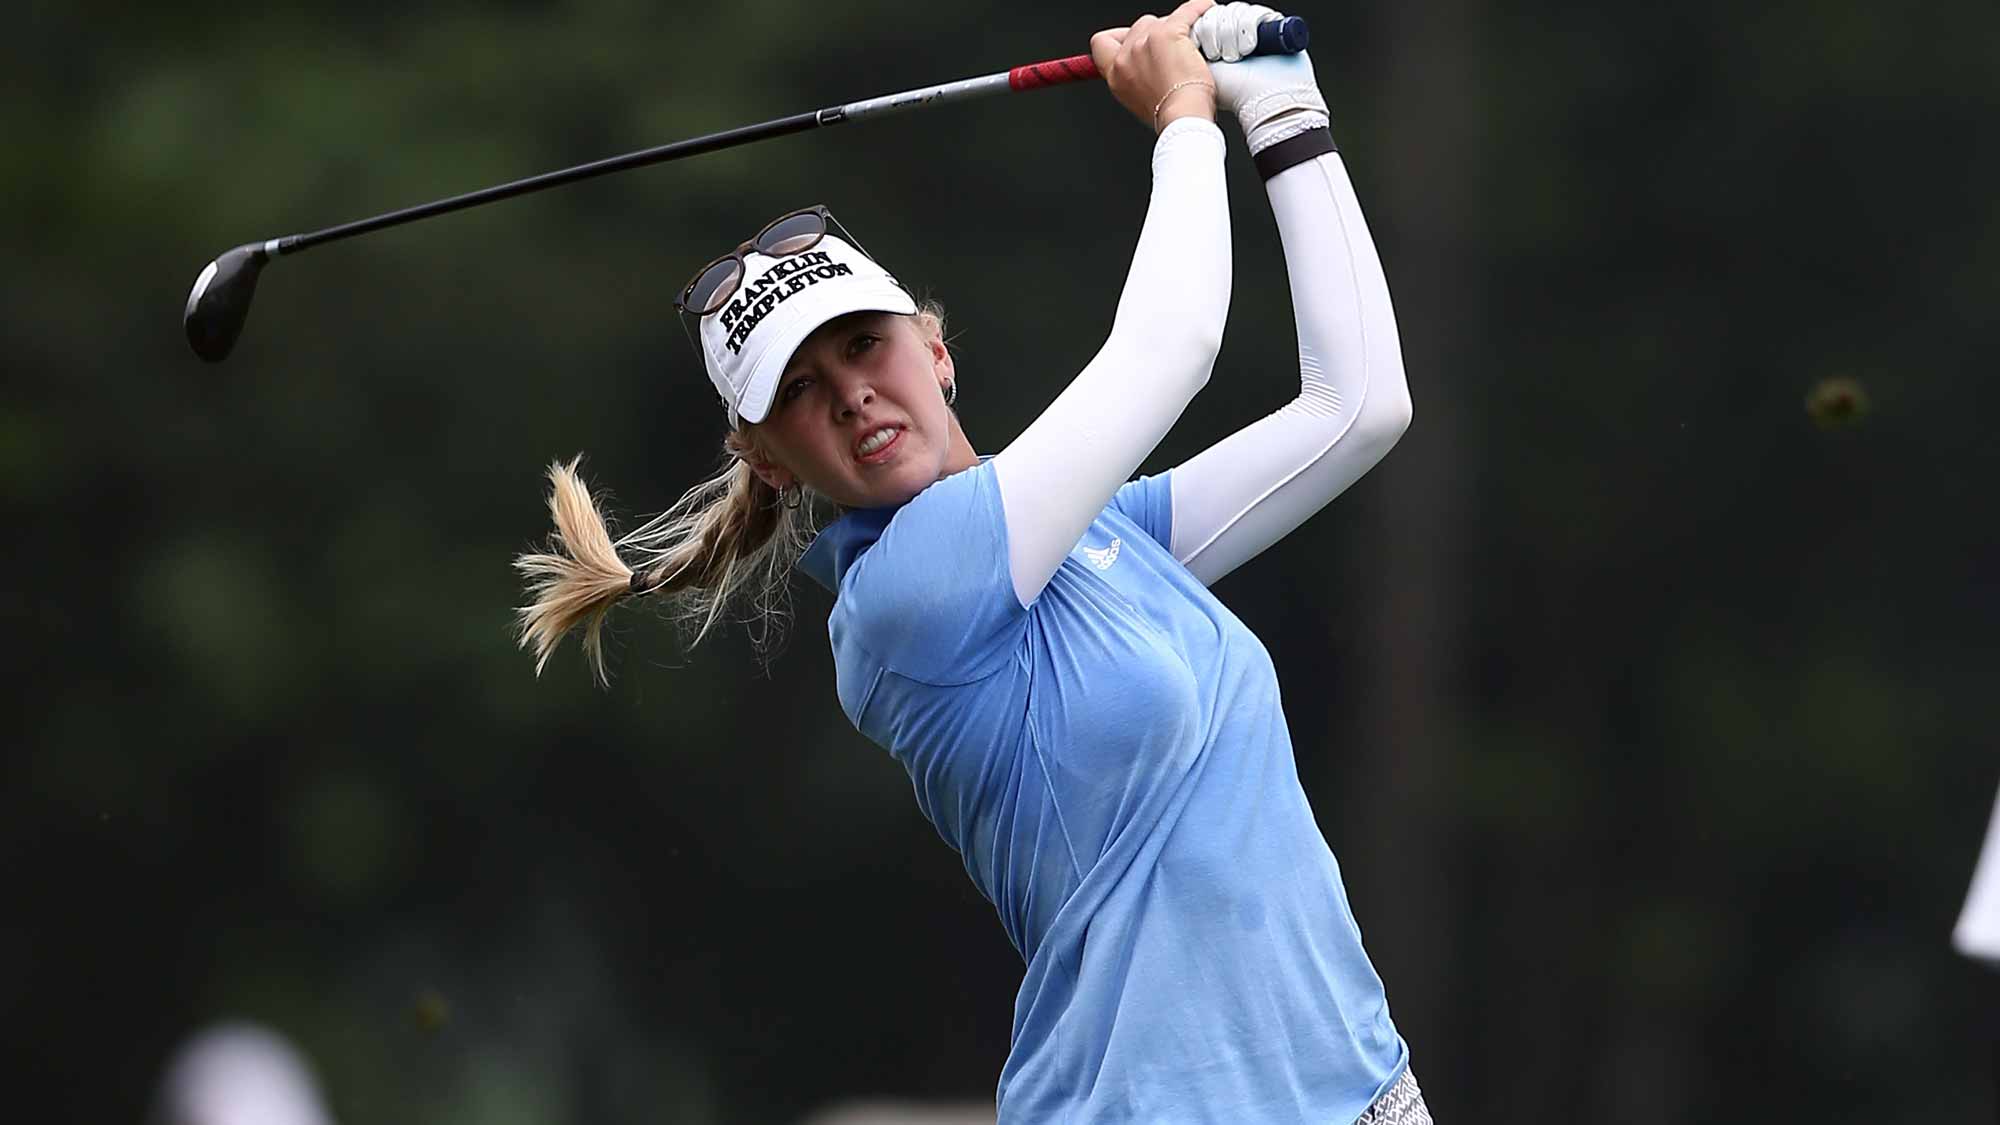 Jessica Korda of USA watches her tee shot on the 6th hole during the final round of the Sime Darby LPGA Tour at Kuala Lumpur Golf & Country Club